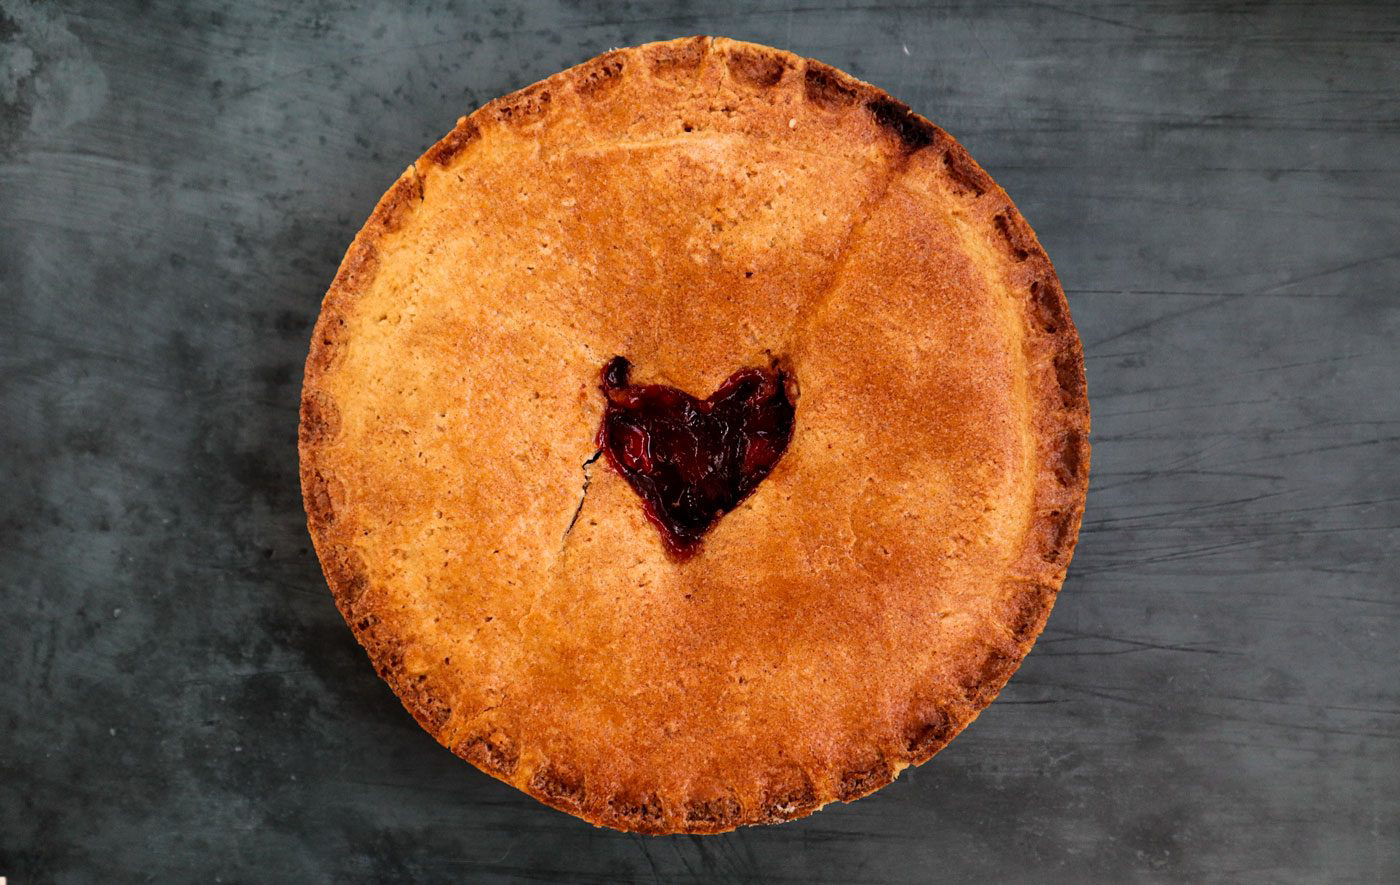 A pie with a heart-shaped center.